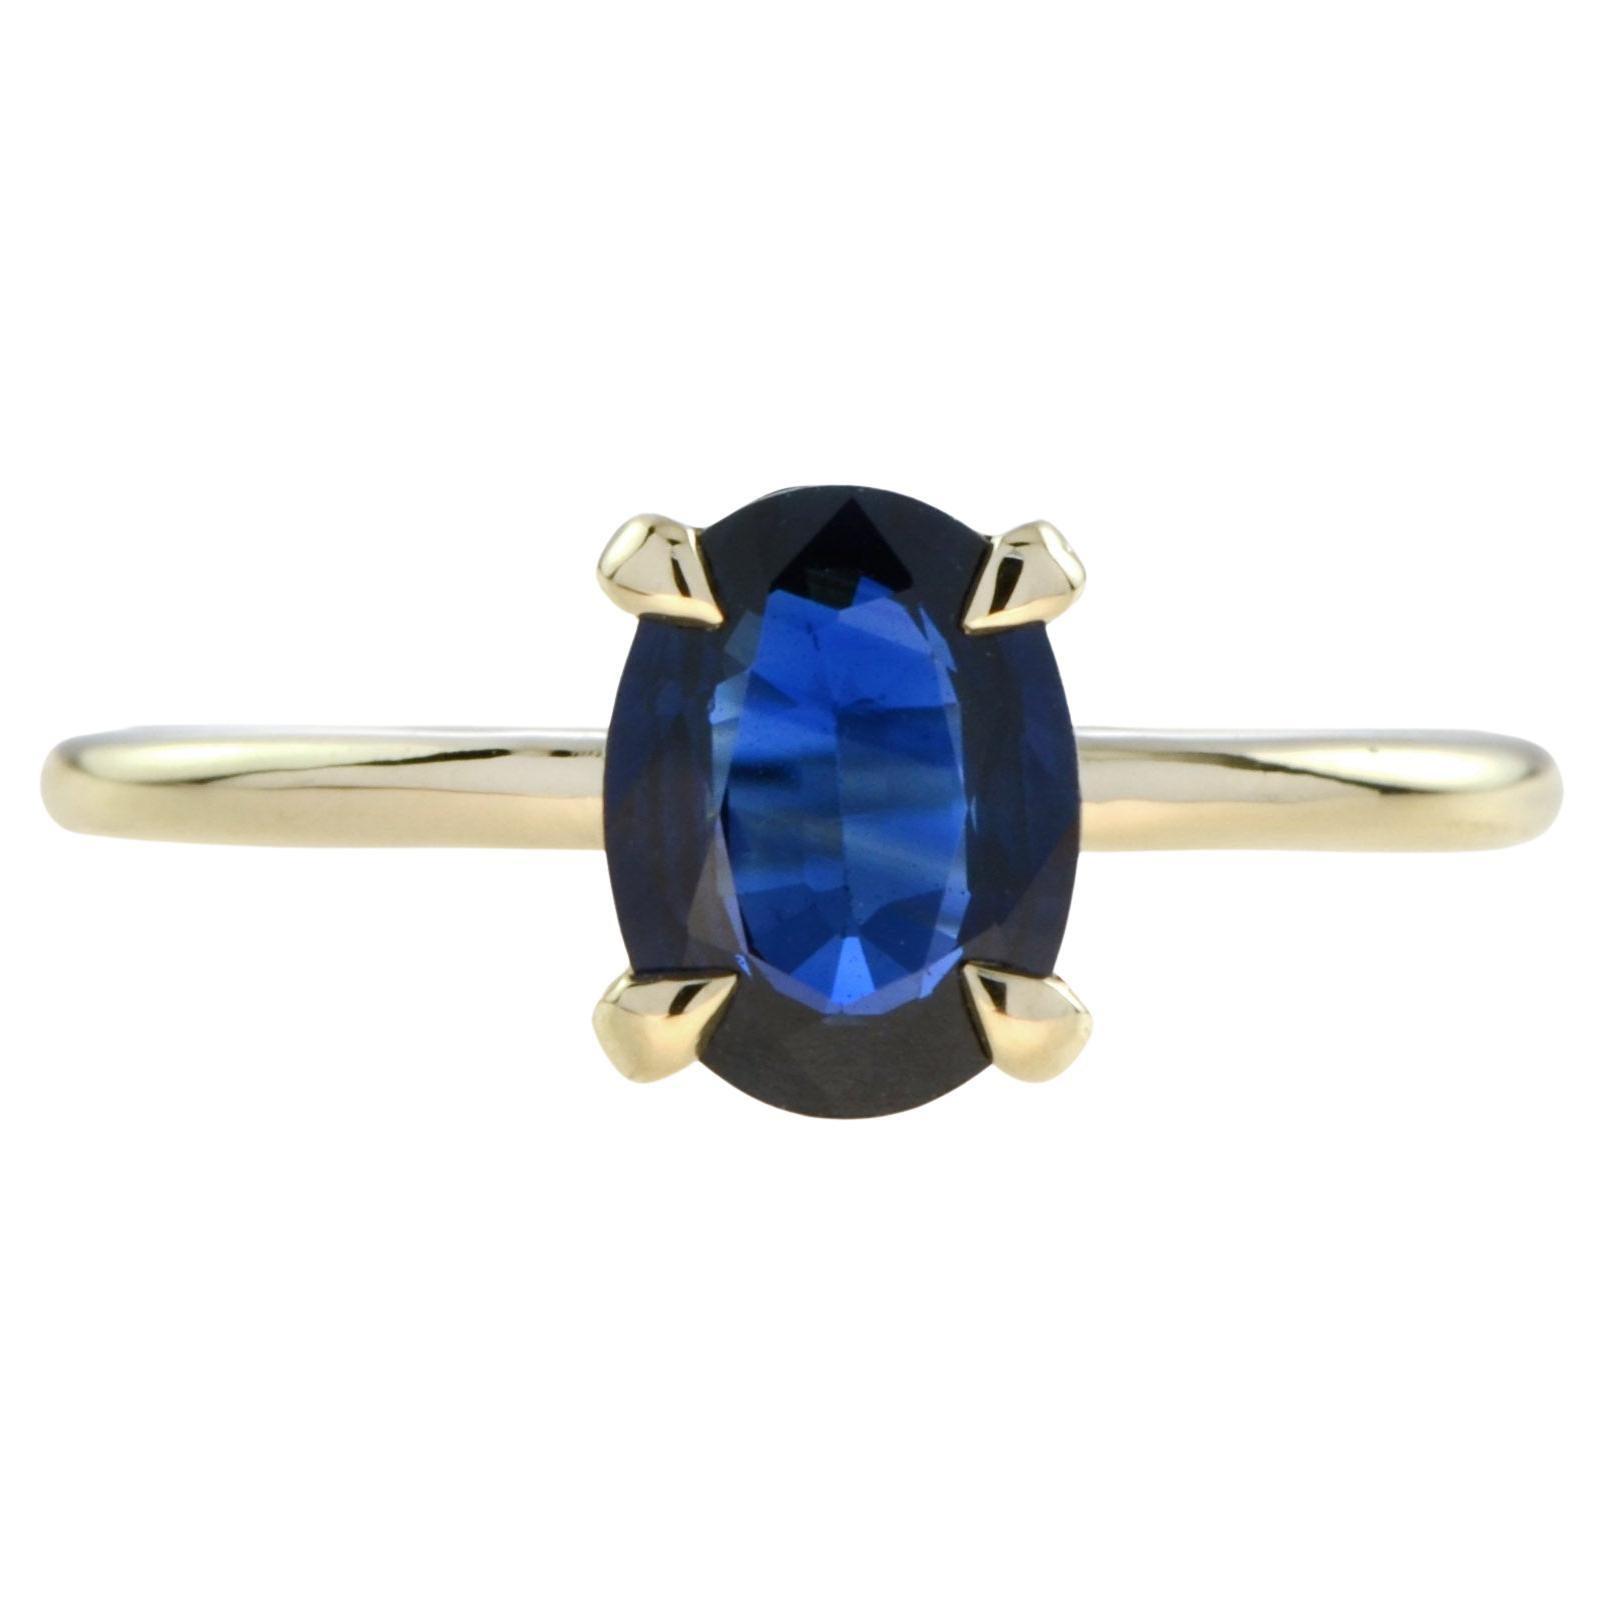 For Sale:  Mia Oval Blue Sapphire Solitaire Ring in 9K Yellow Gold